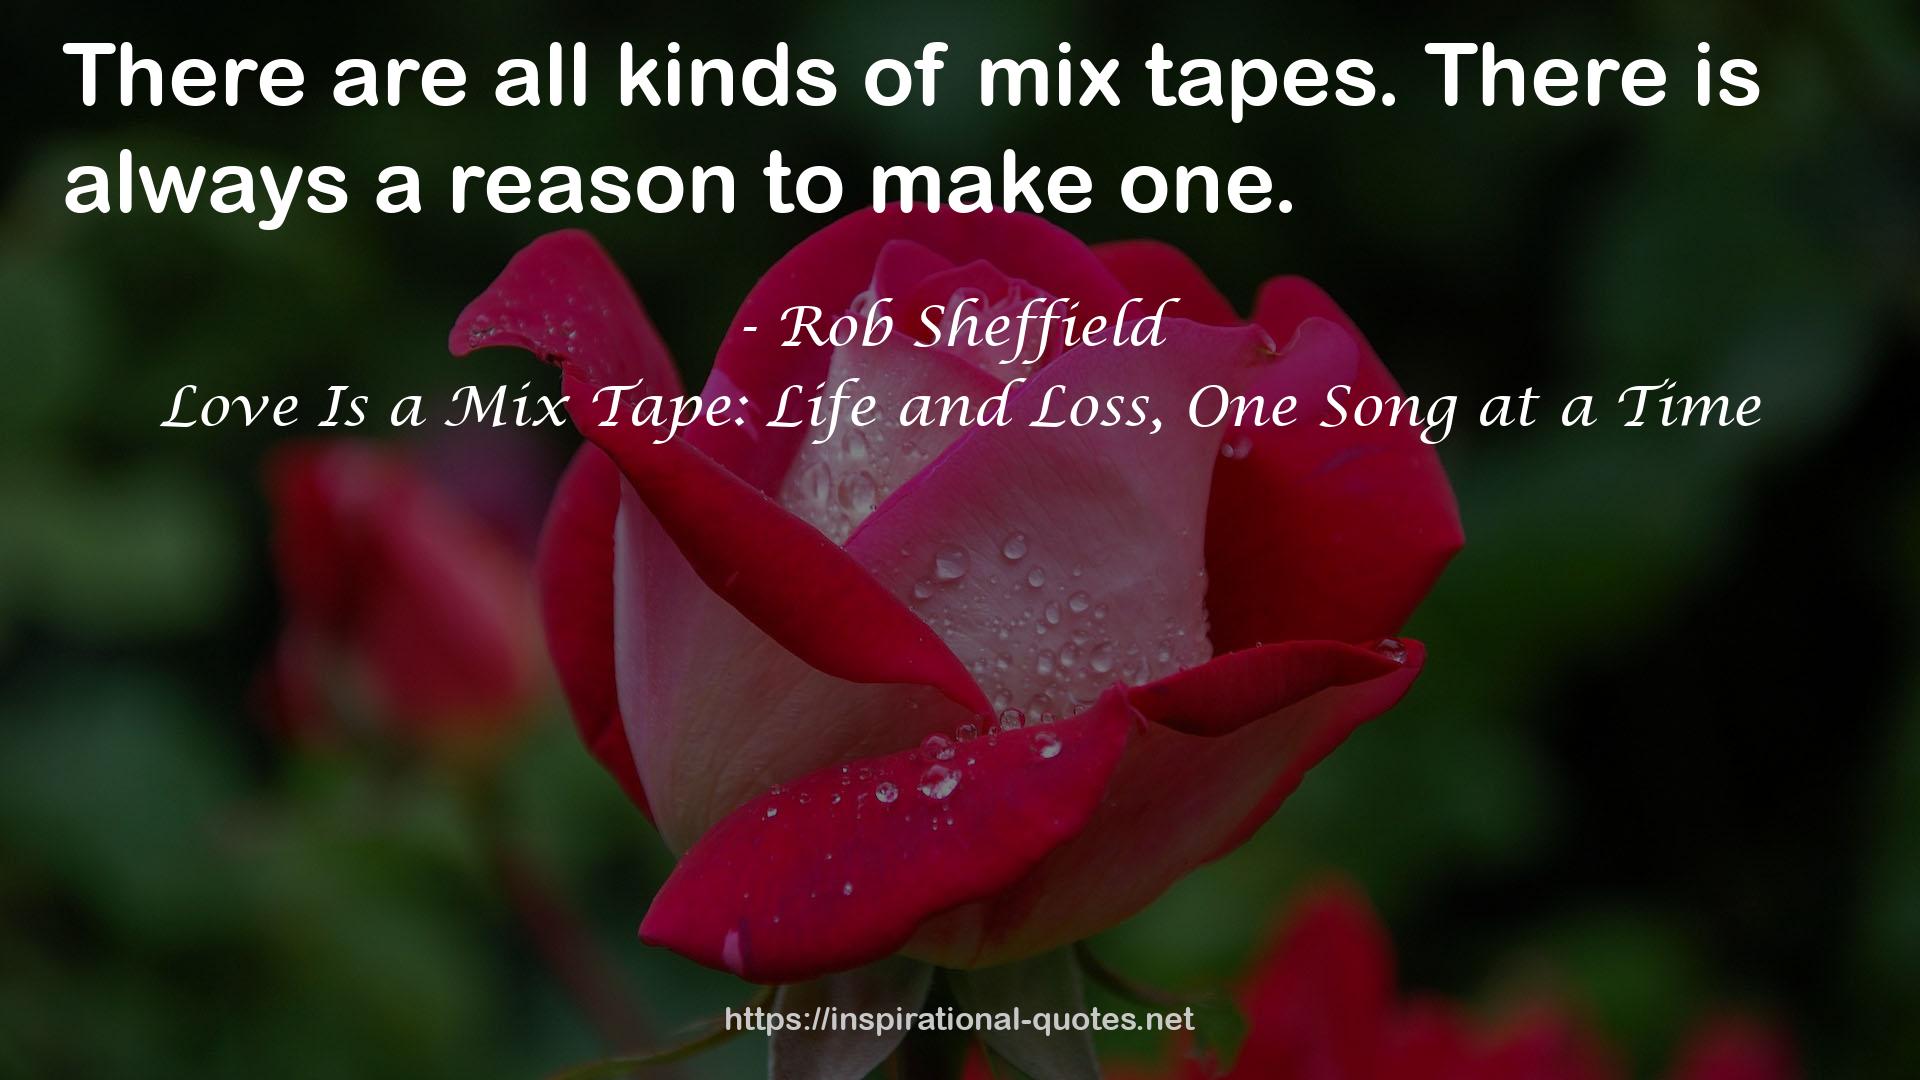 Love Is a Mix Tape: Life and Loss, One Song at a Time QUOTES